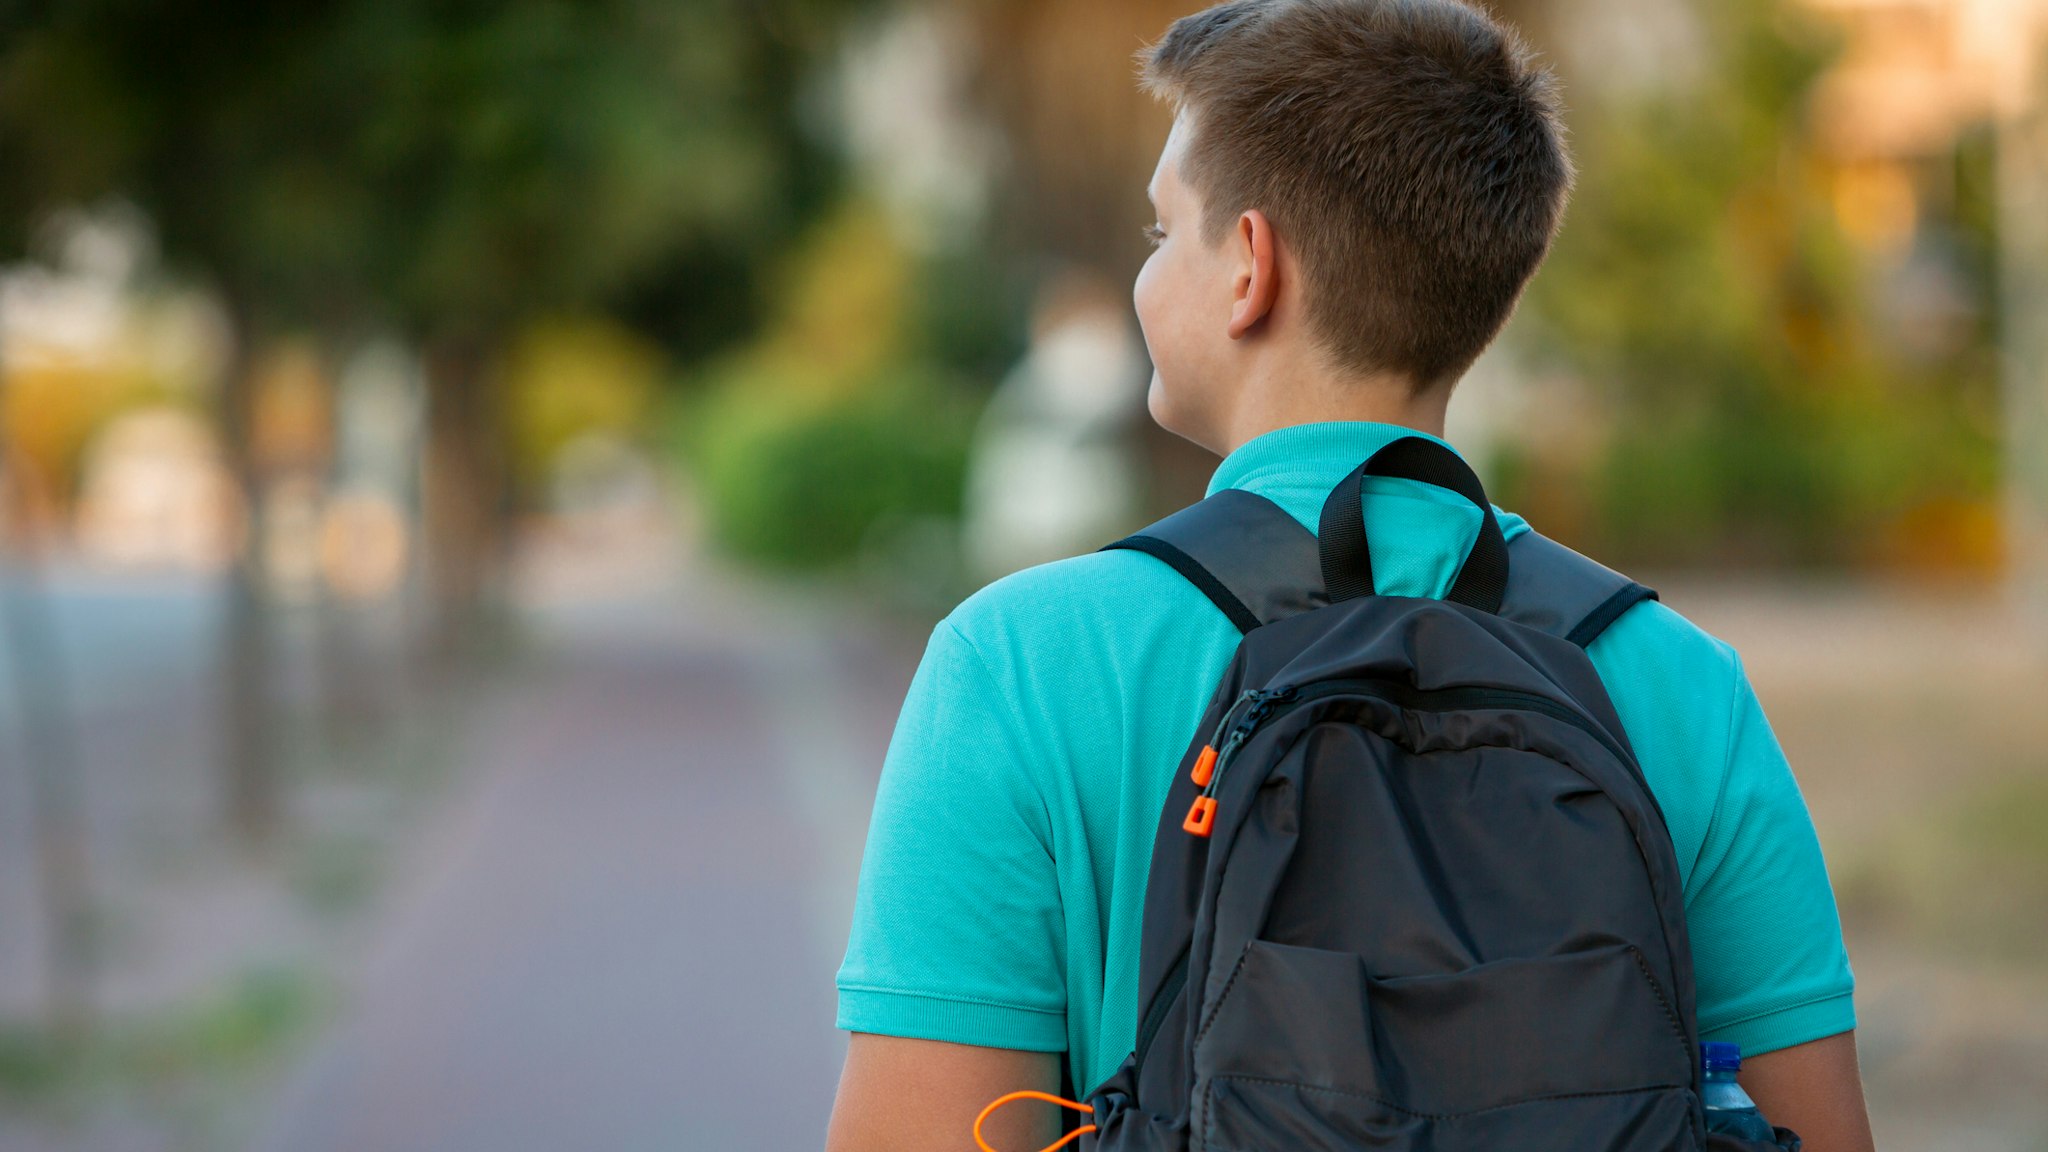 Radiating enthusiasm and dressed in a vibrant turquoise T-shirt, a cheerful teen boy stands ready for school with a backpack in hand. His joyful expression reflects a genuine love for learning as he embraces the excitement of a new day. The warm glow of late daytime enhances the scene, casting a positive light on this junior adventurer's journey into the world of education. This image captures the spirit of youthful exuberance and the anticipation of new discoveries in the school environment.